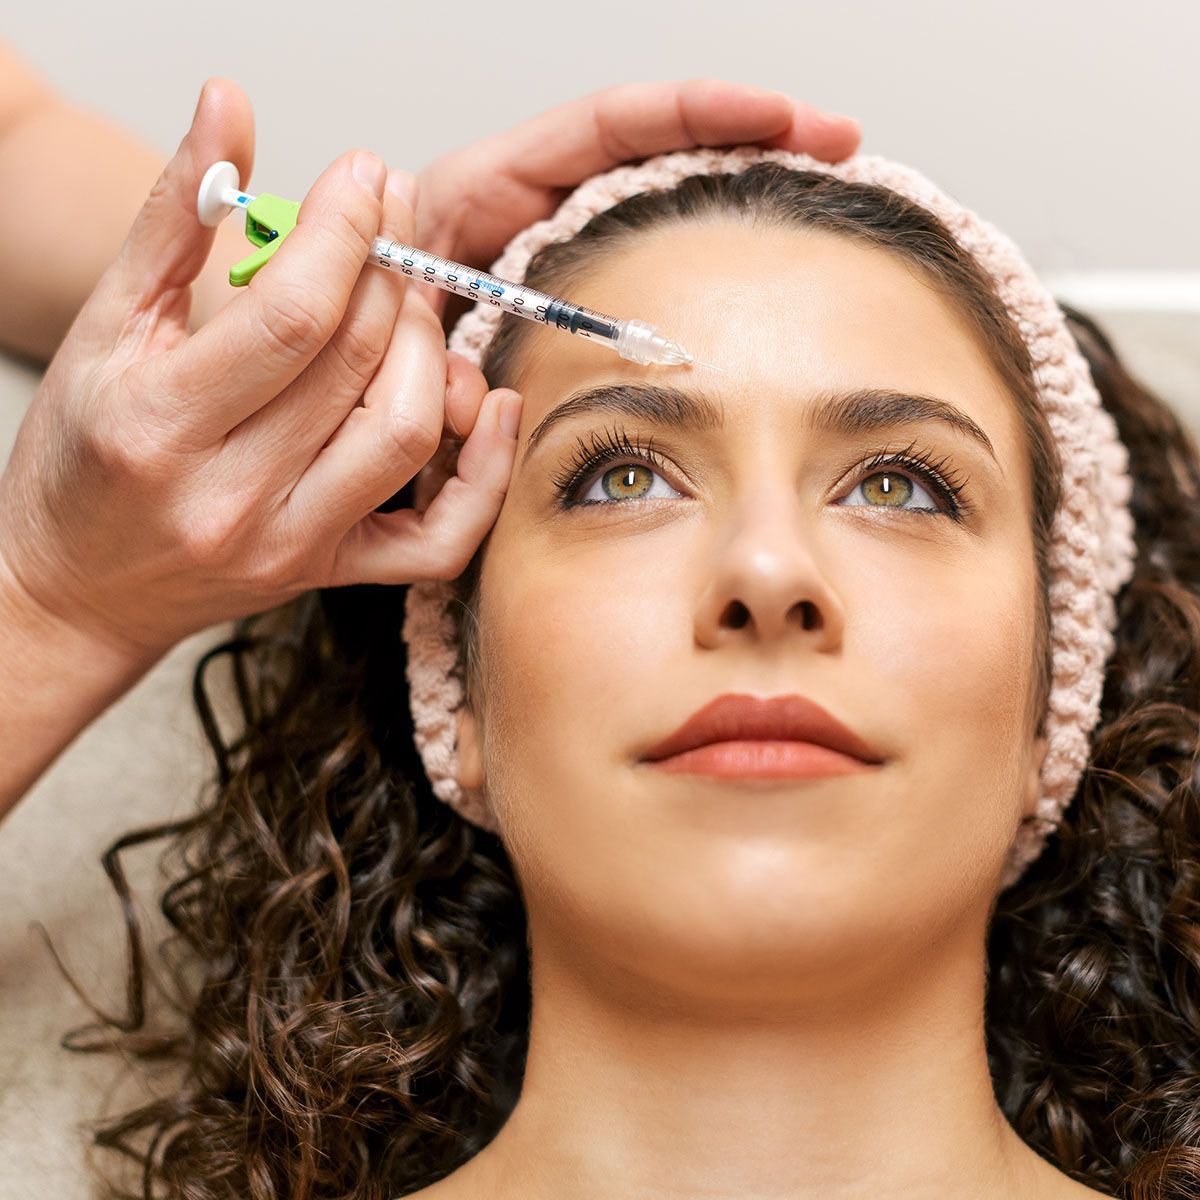 A woman is getting a botox injection on her forehead